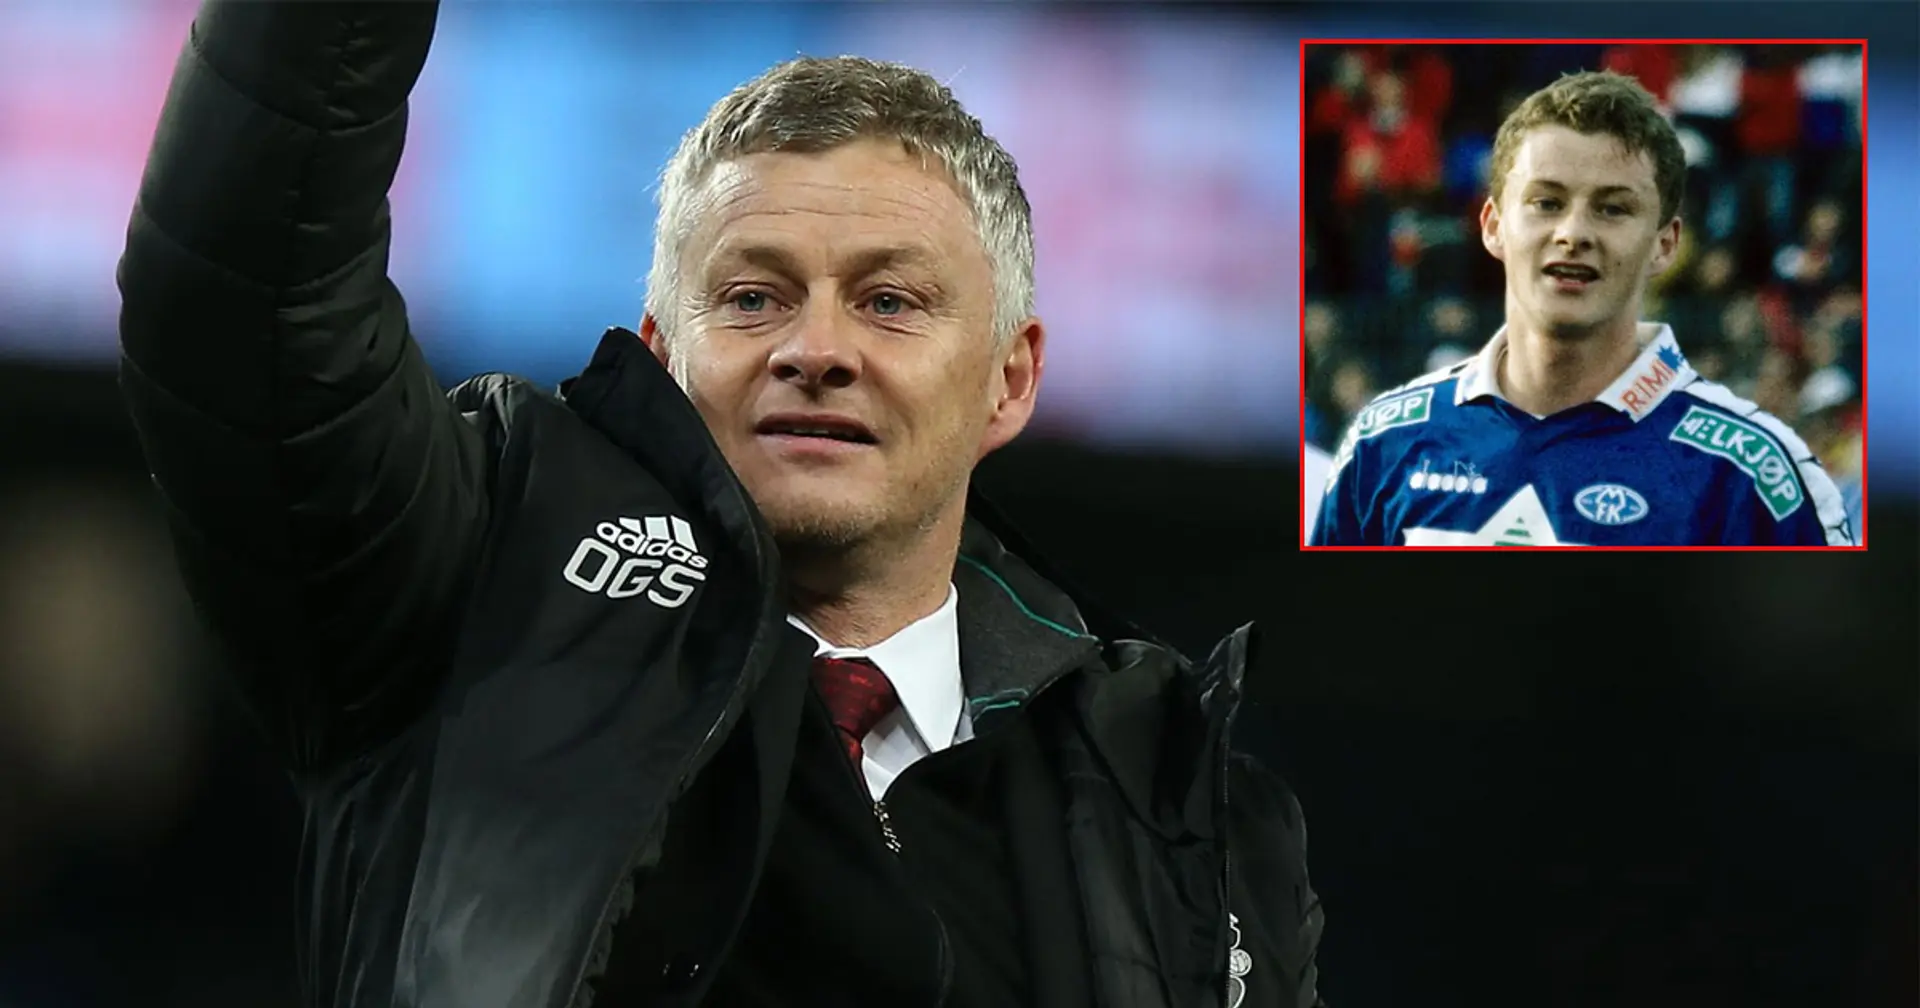 Solskjaer reveals Liverpool wanted to sign him in 1996 but joining United was his 'only one choice'